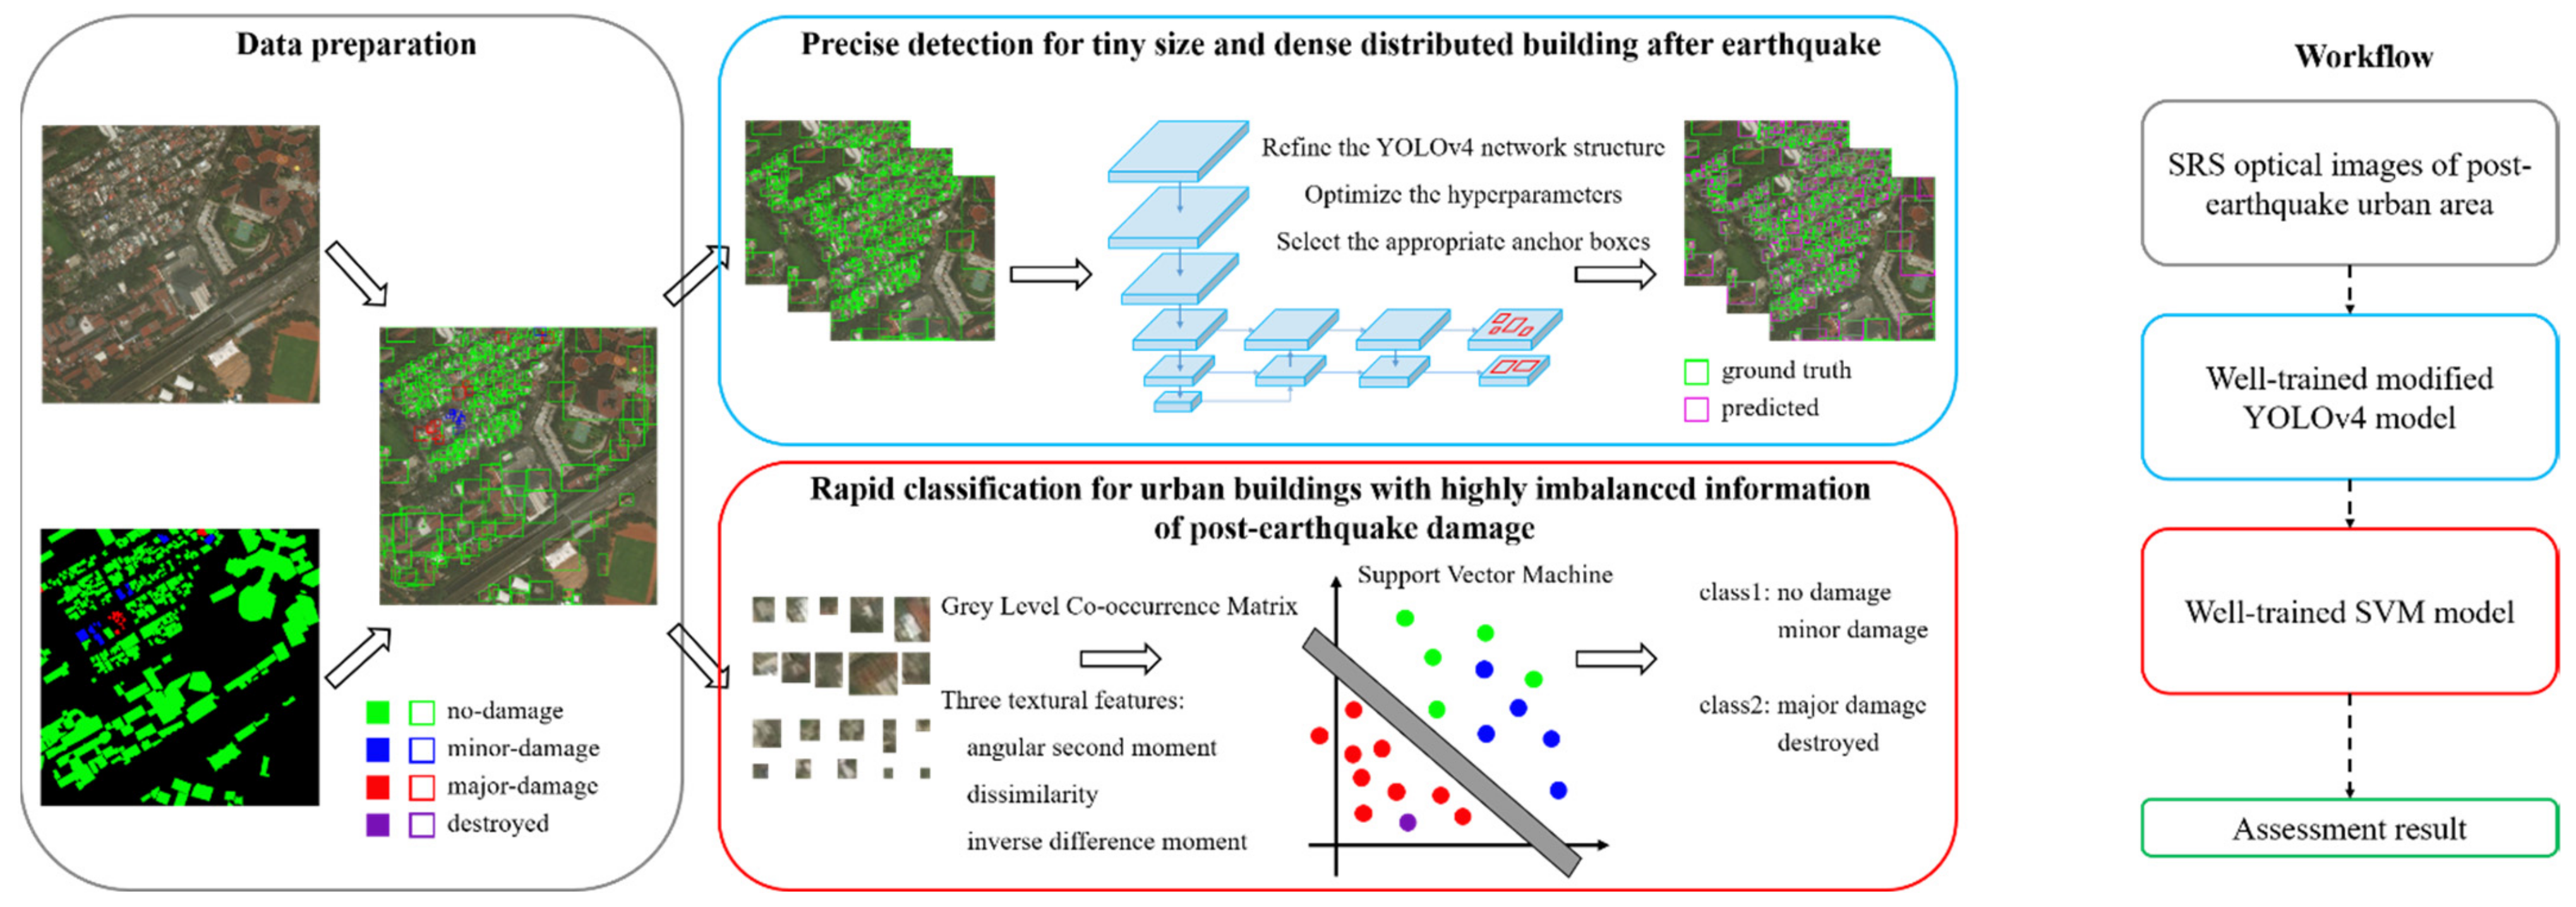 Remote Sensing | Free Full-Text | A Two-Stage Seismic Damage Assessment  Method for Small, Dense, and Imbalanced Buildings in Remote Sensing Images  | HTML